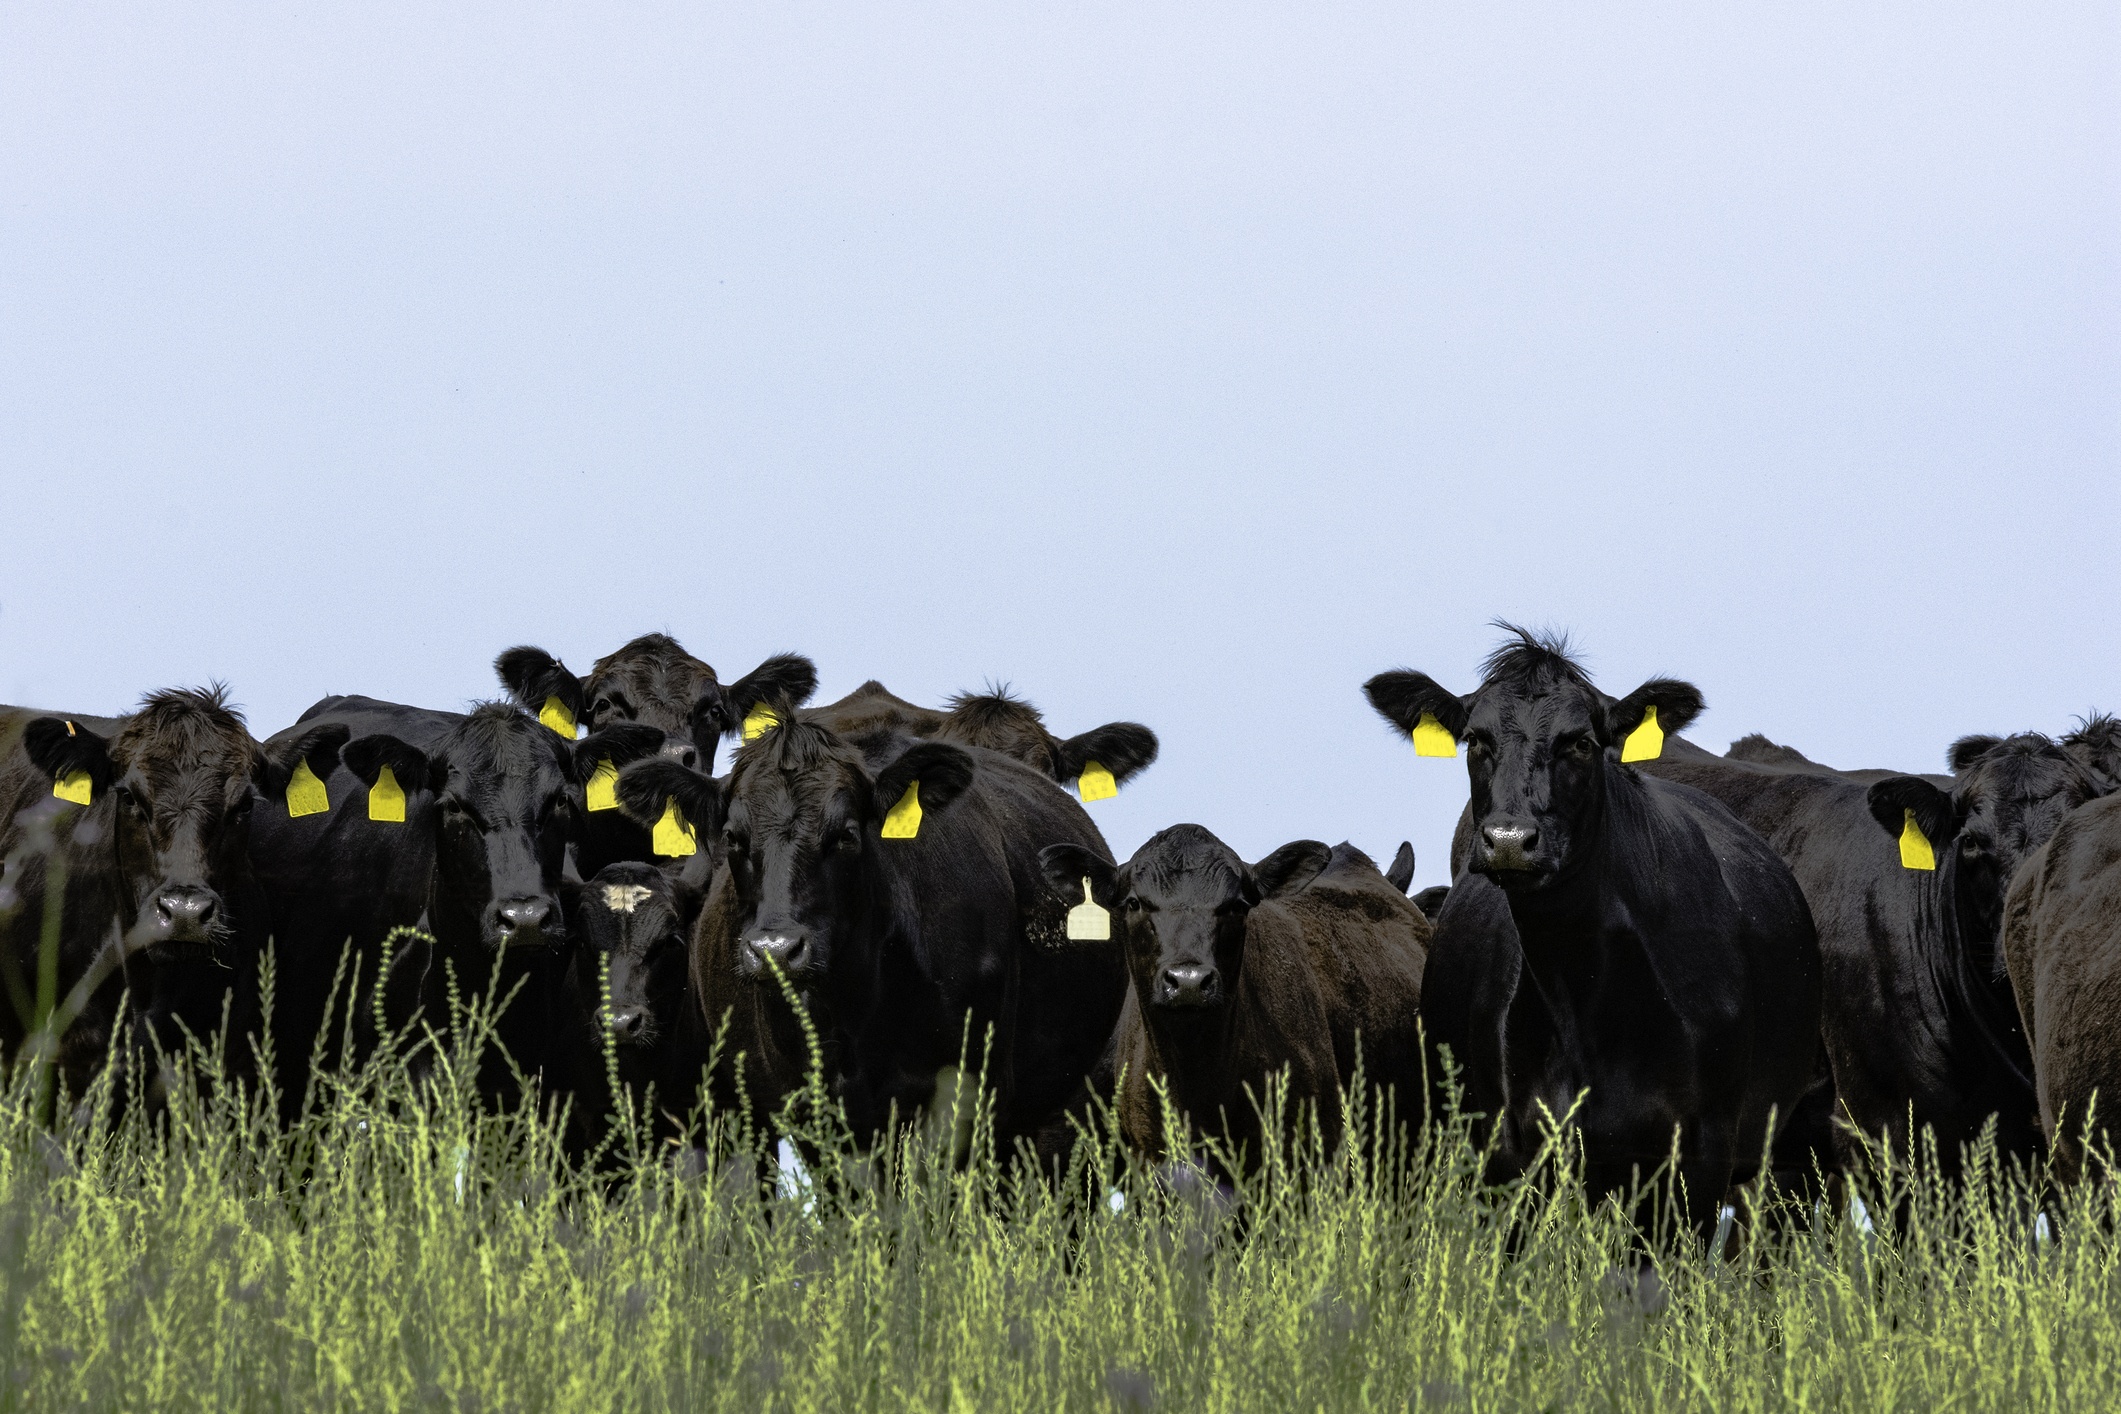 Line of Angus cattle